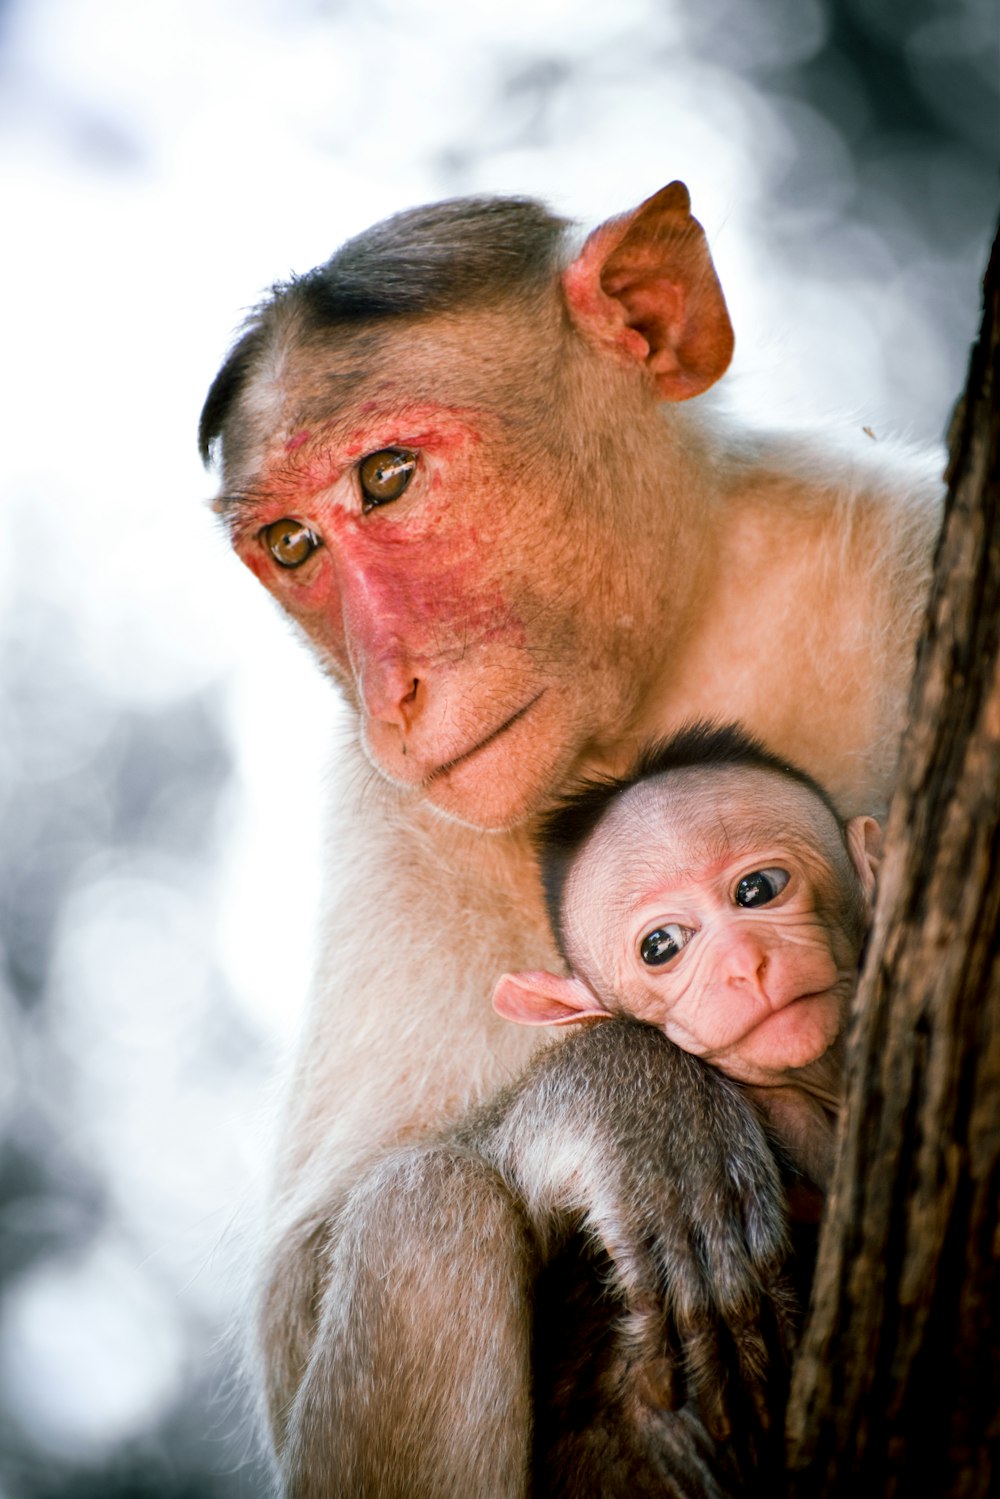 a monkey holding a baby in a tree